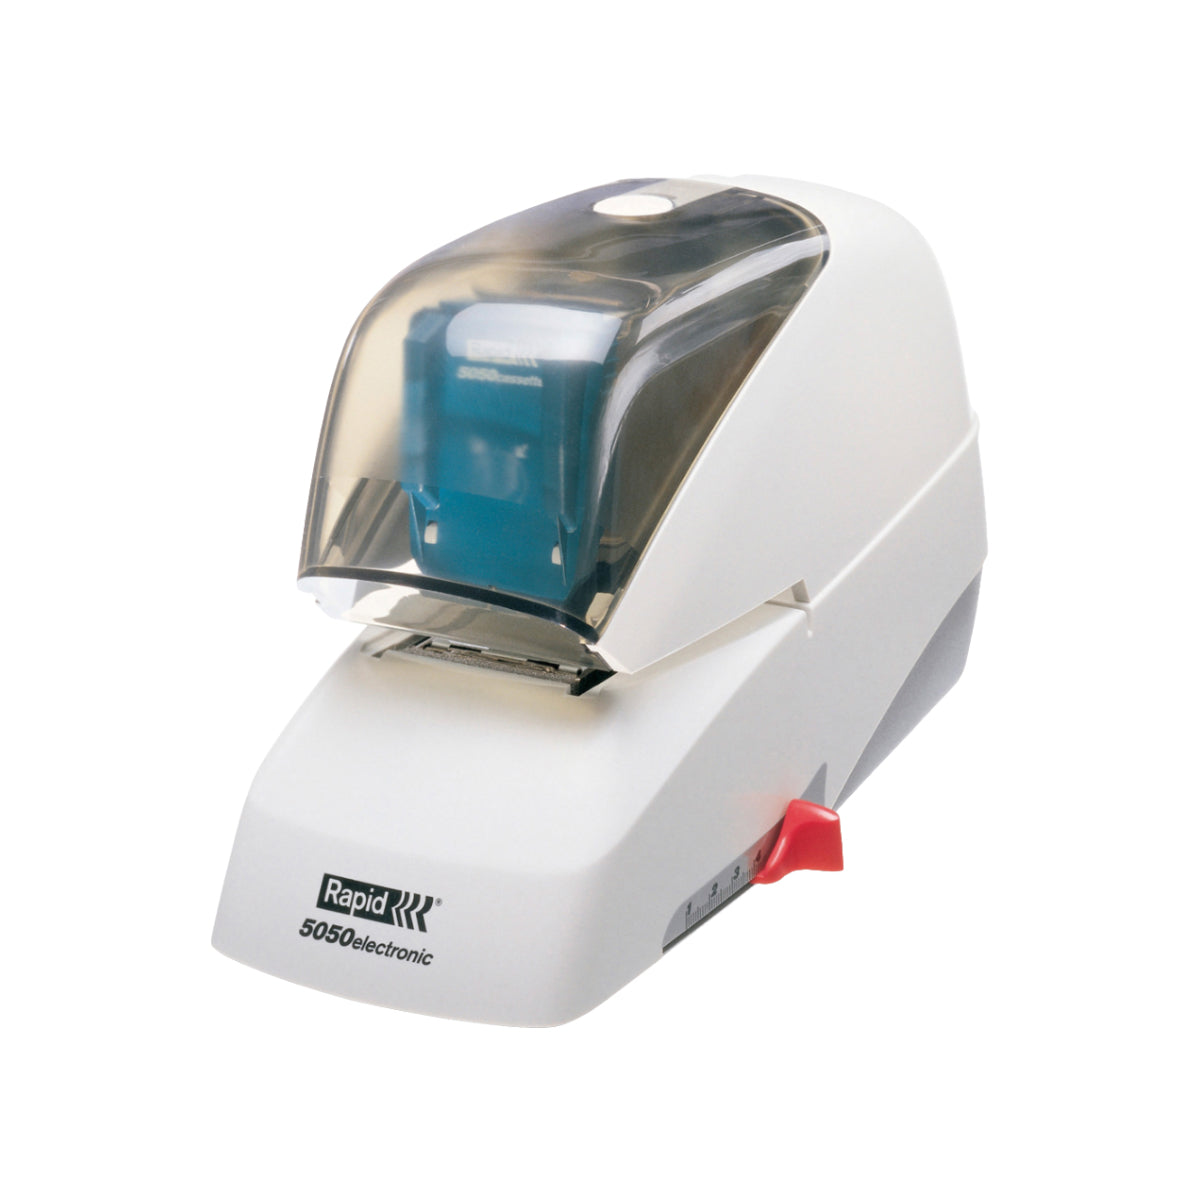 Rapid 5050 Electric Stapler, 50 Sheets Capacity